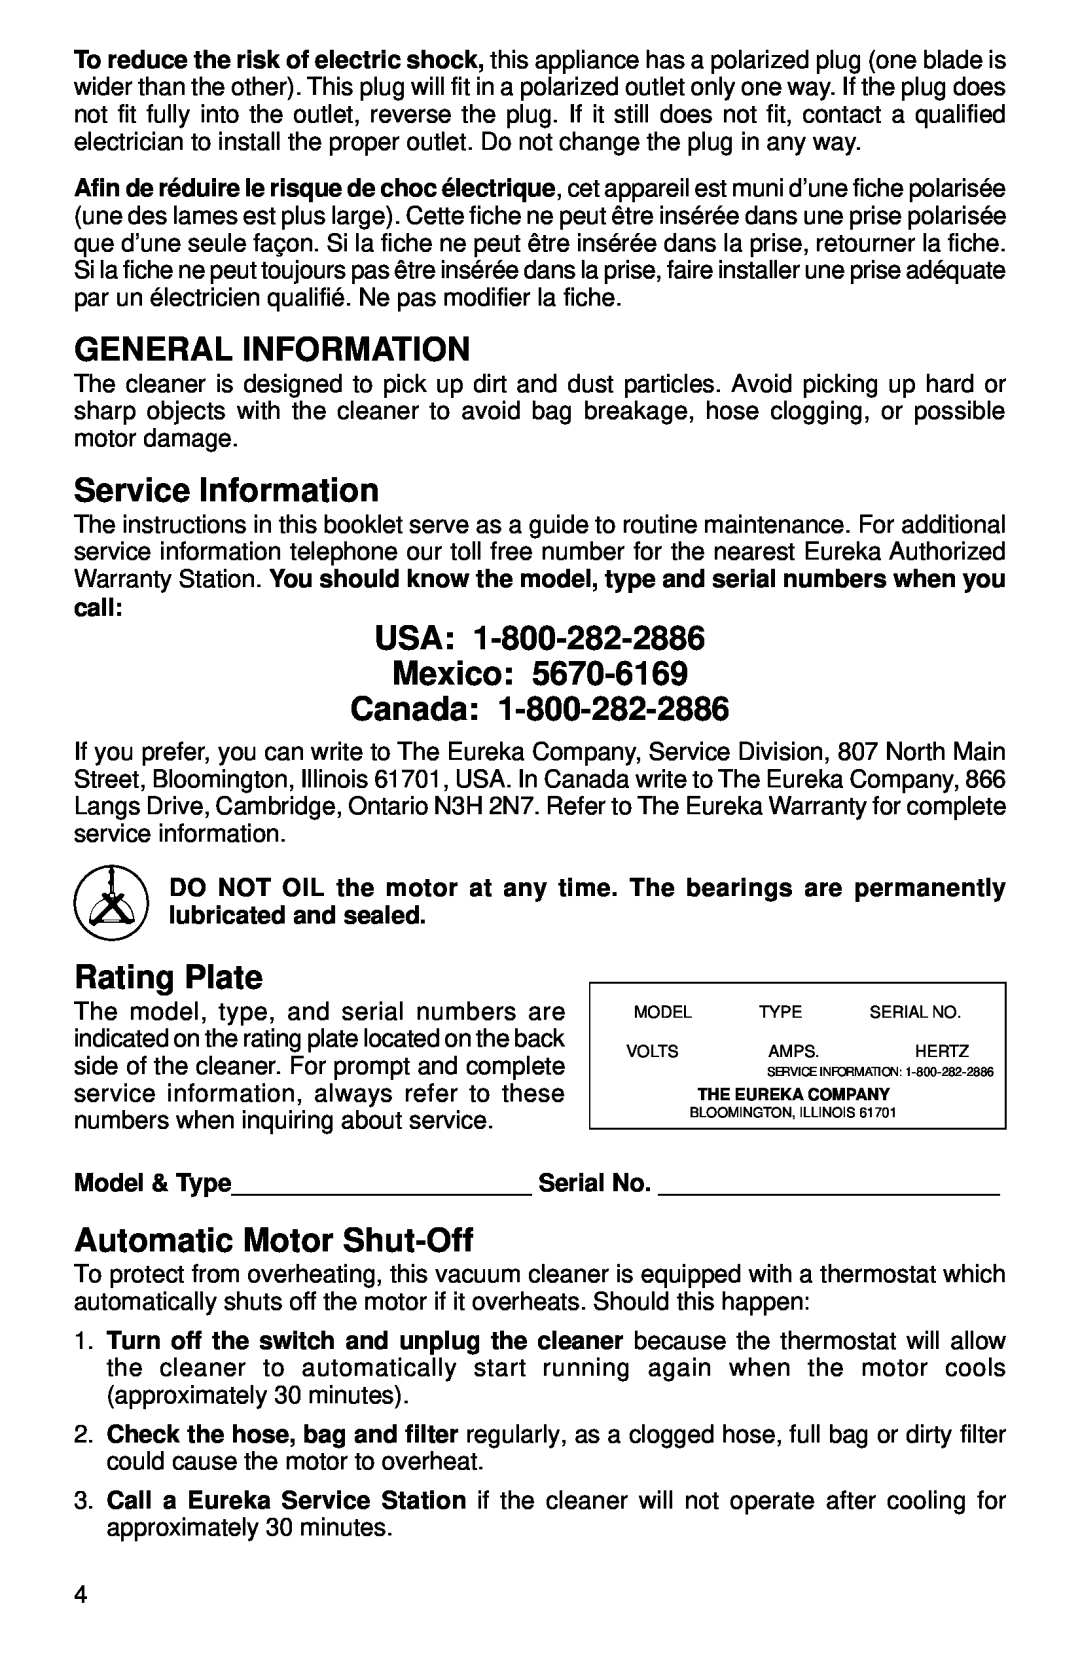 Eureka 3690 warranty General Information, Service Information, USA Mexico Canada, Rating Plate, Automatic Motor Shut-Off 